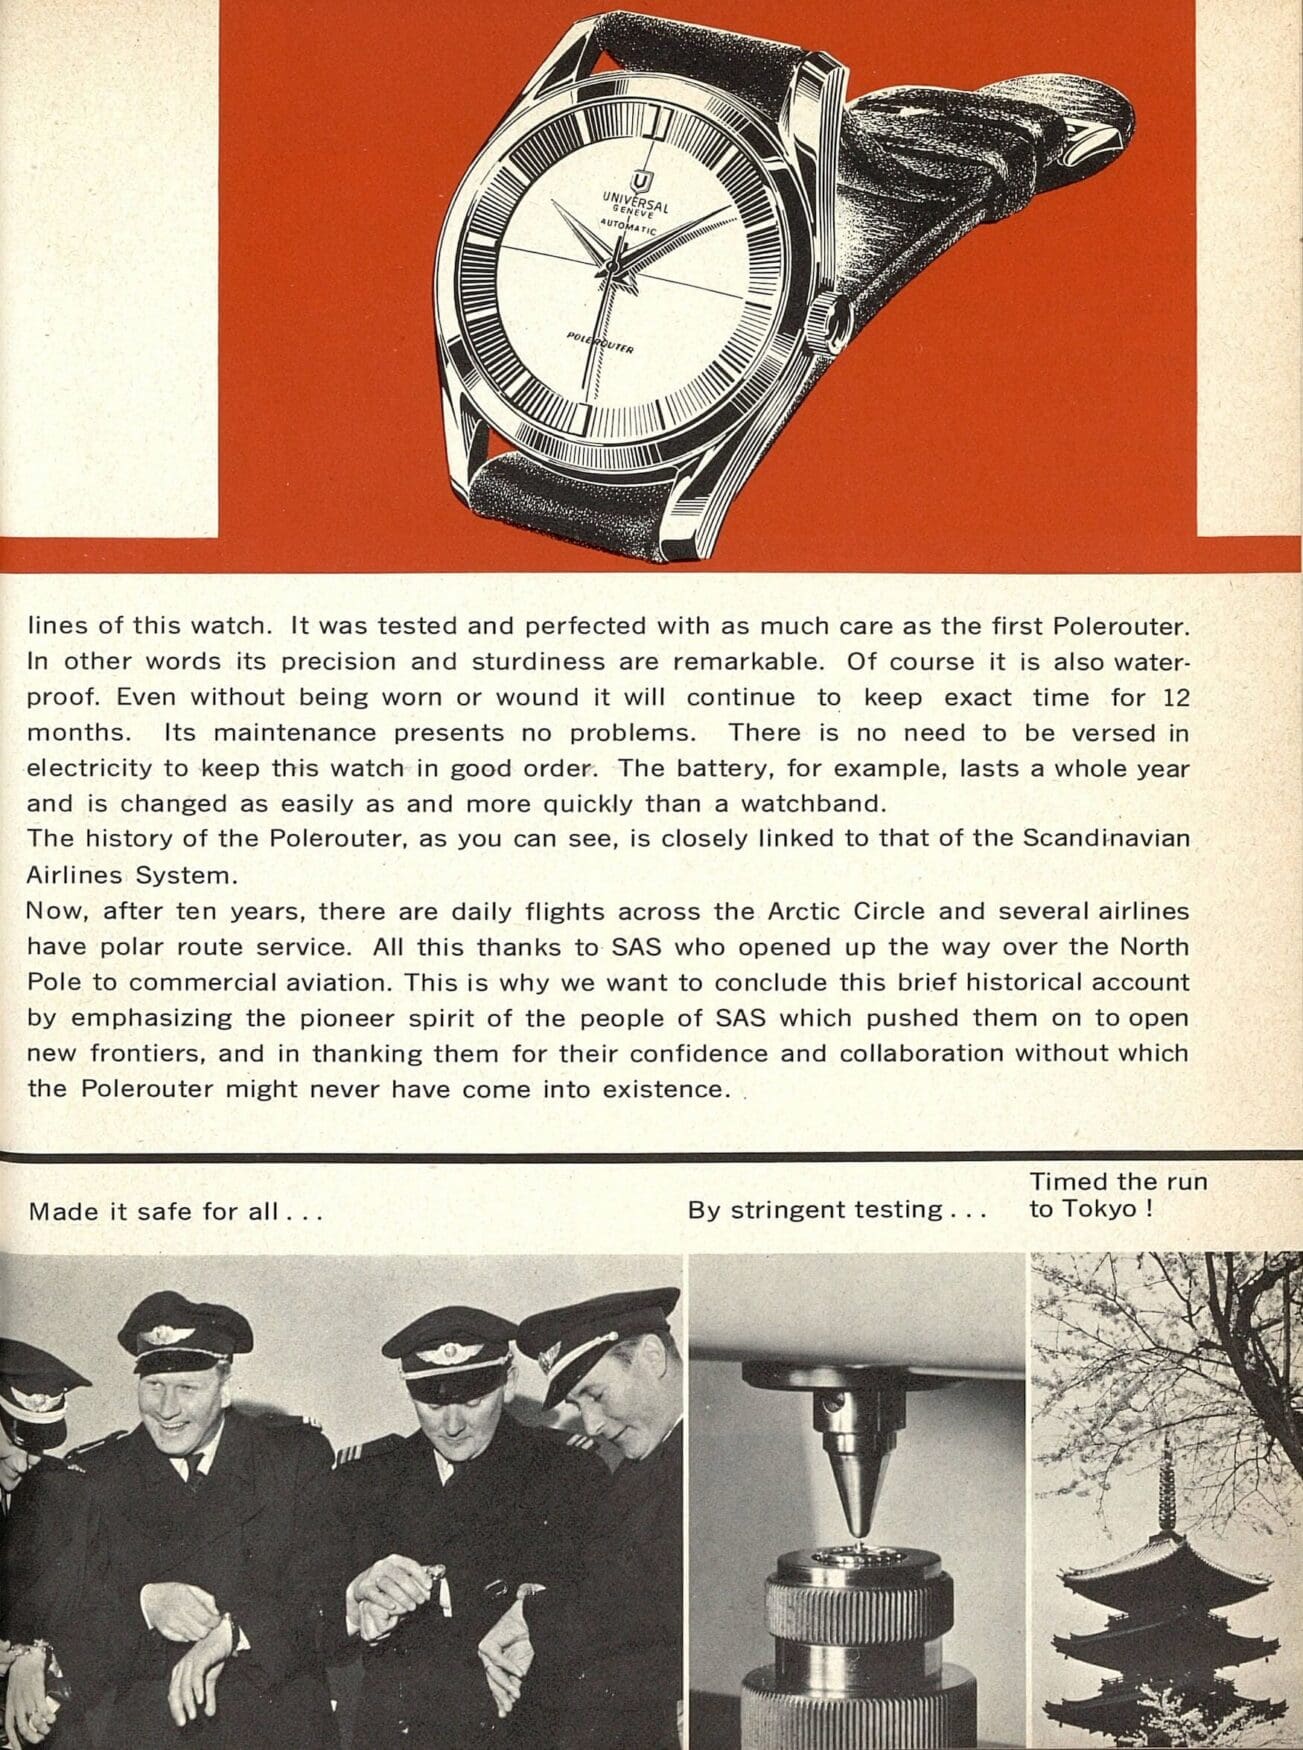 Breitling Universal Geneve 01 Article about the Universal Geneve Polerouter published in Europa Star in 1965